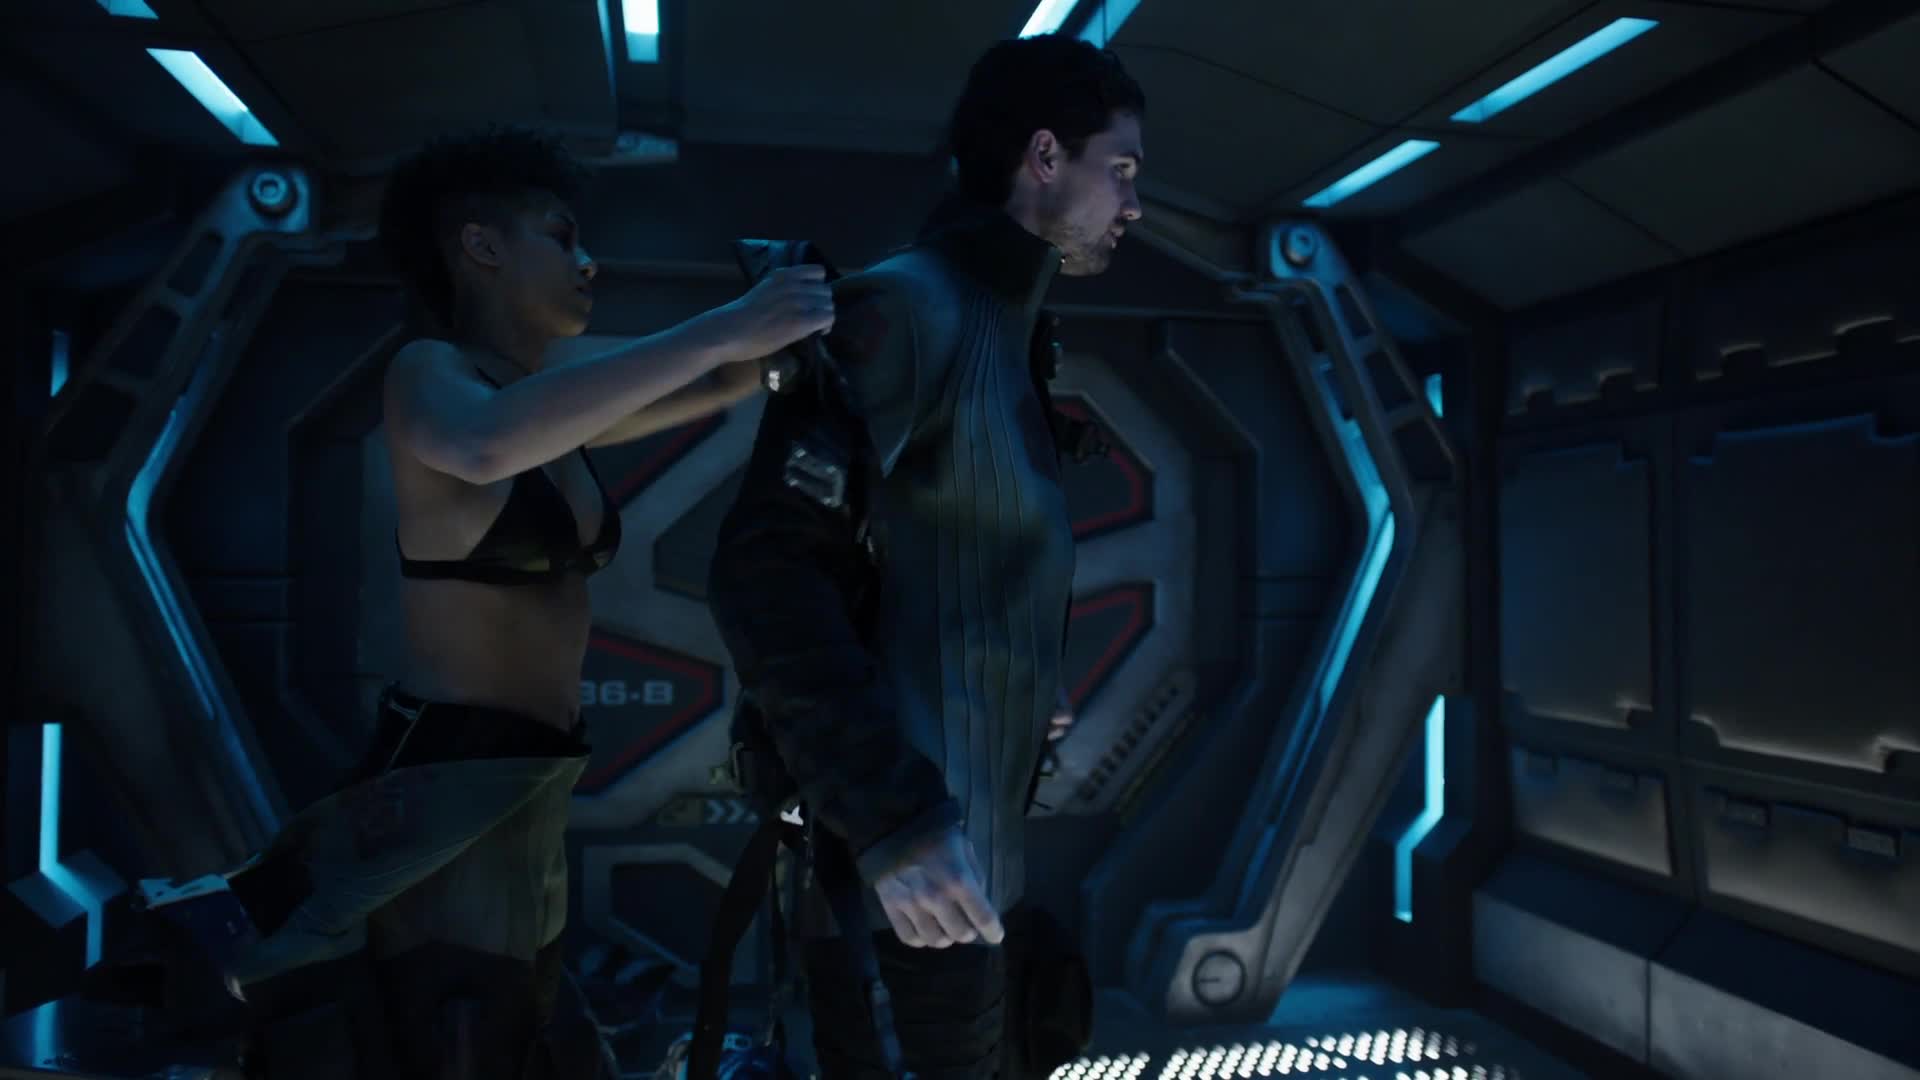 The expanse nudity